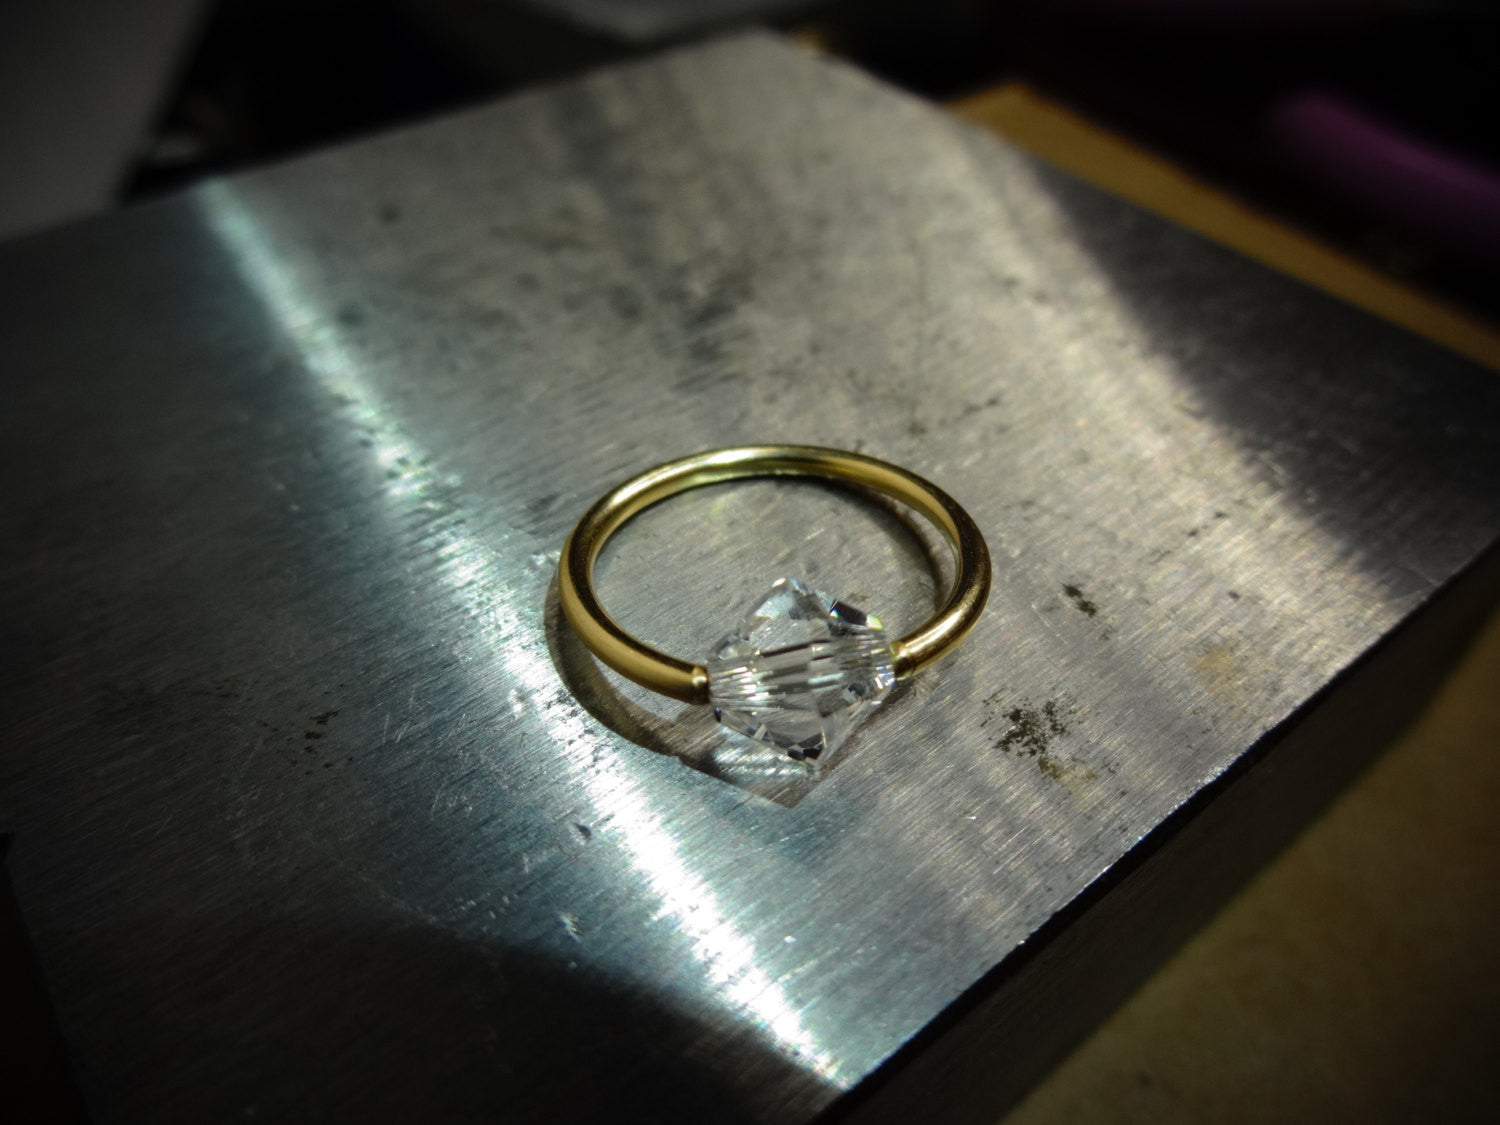 Captive Bead Ring made with 6mm CLEAR Swarovski Crystal - 16 ga Hoop - 14k Gold (Y, W, or R), Sterling Silver, or Platinum